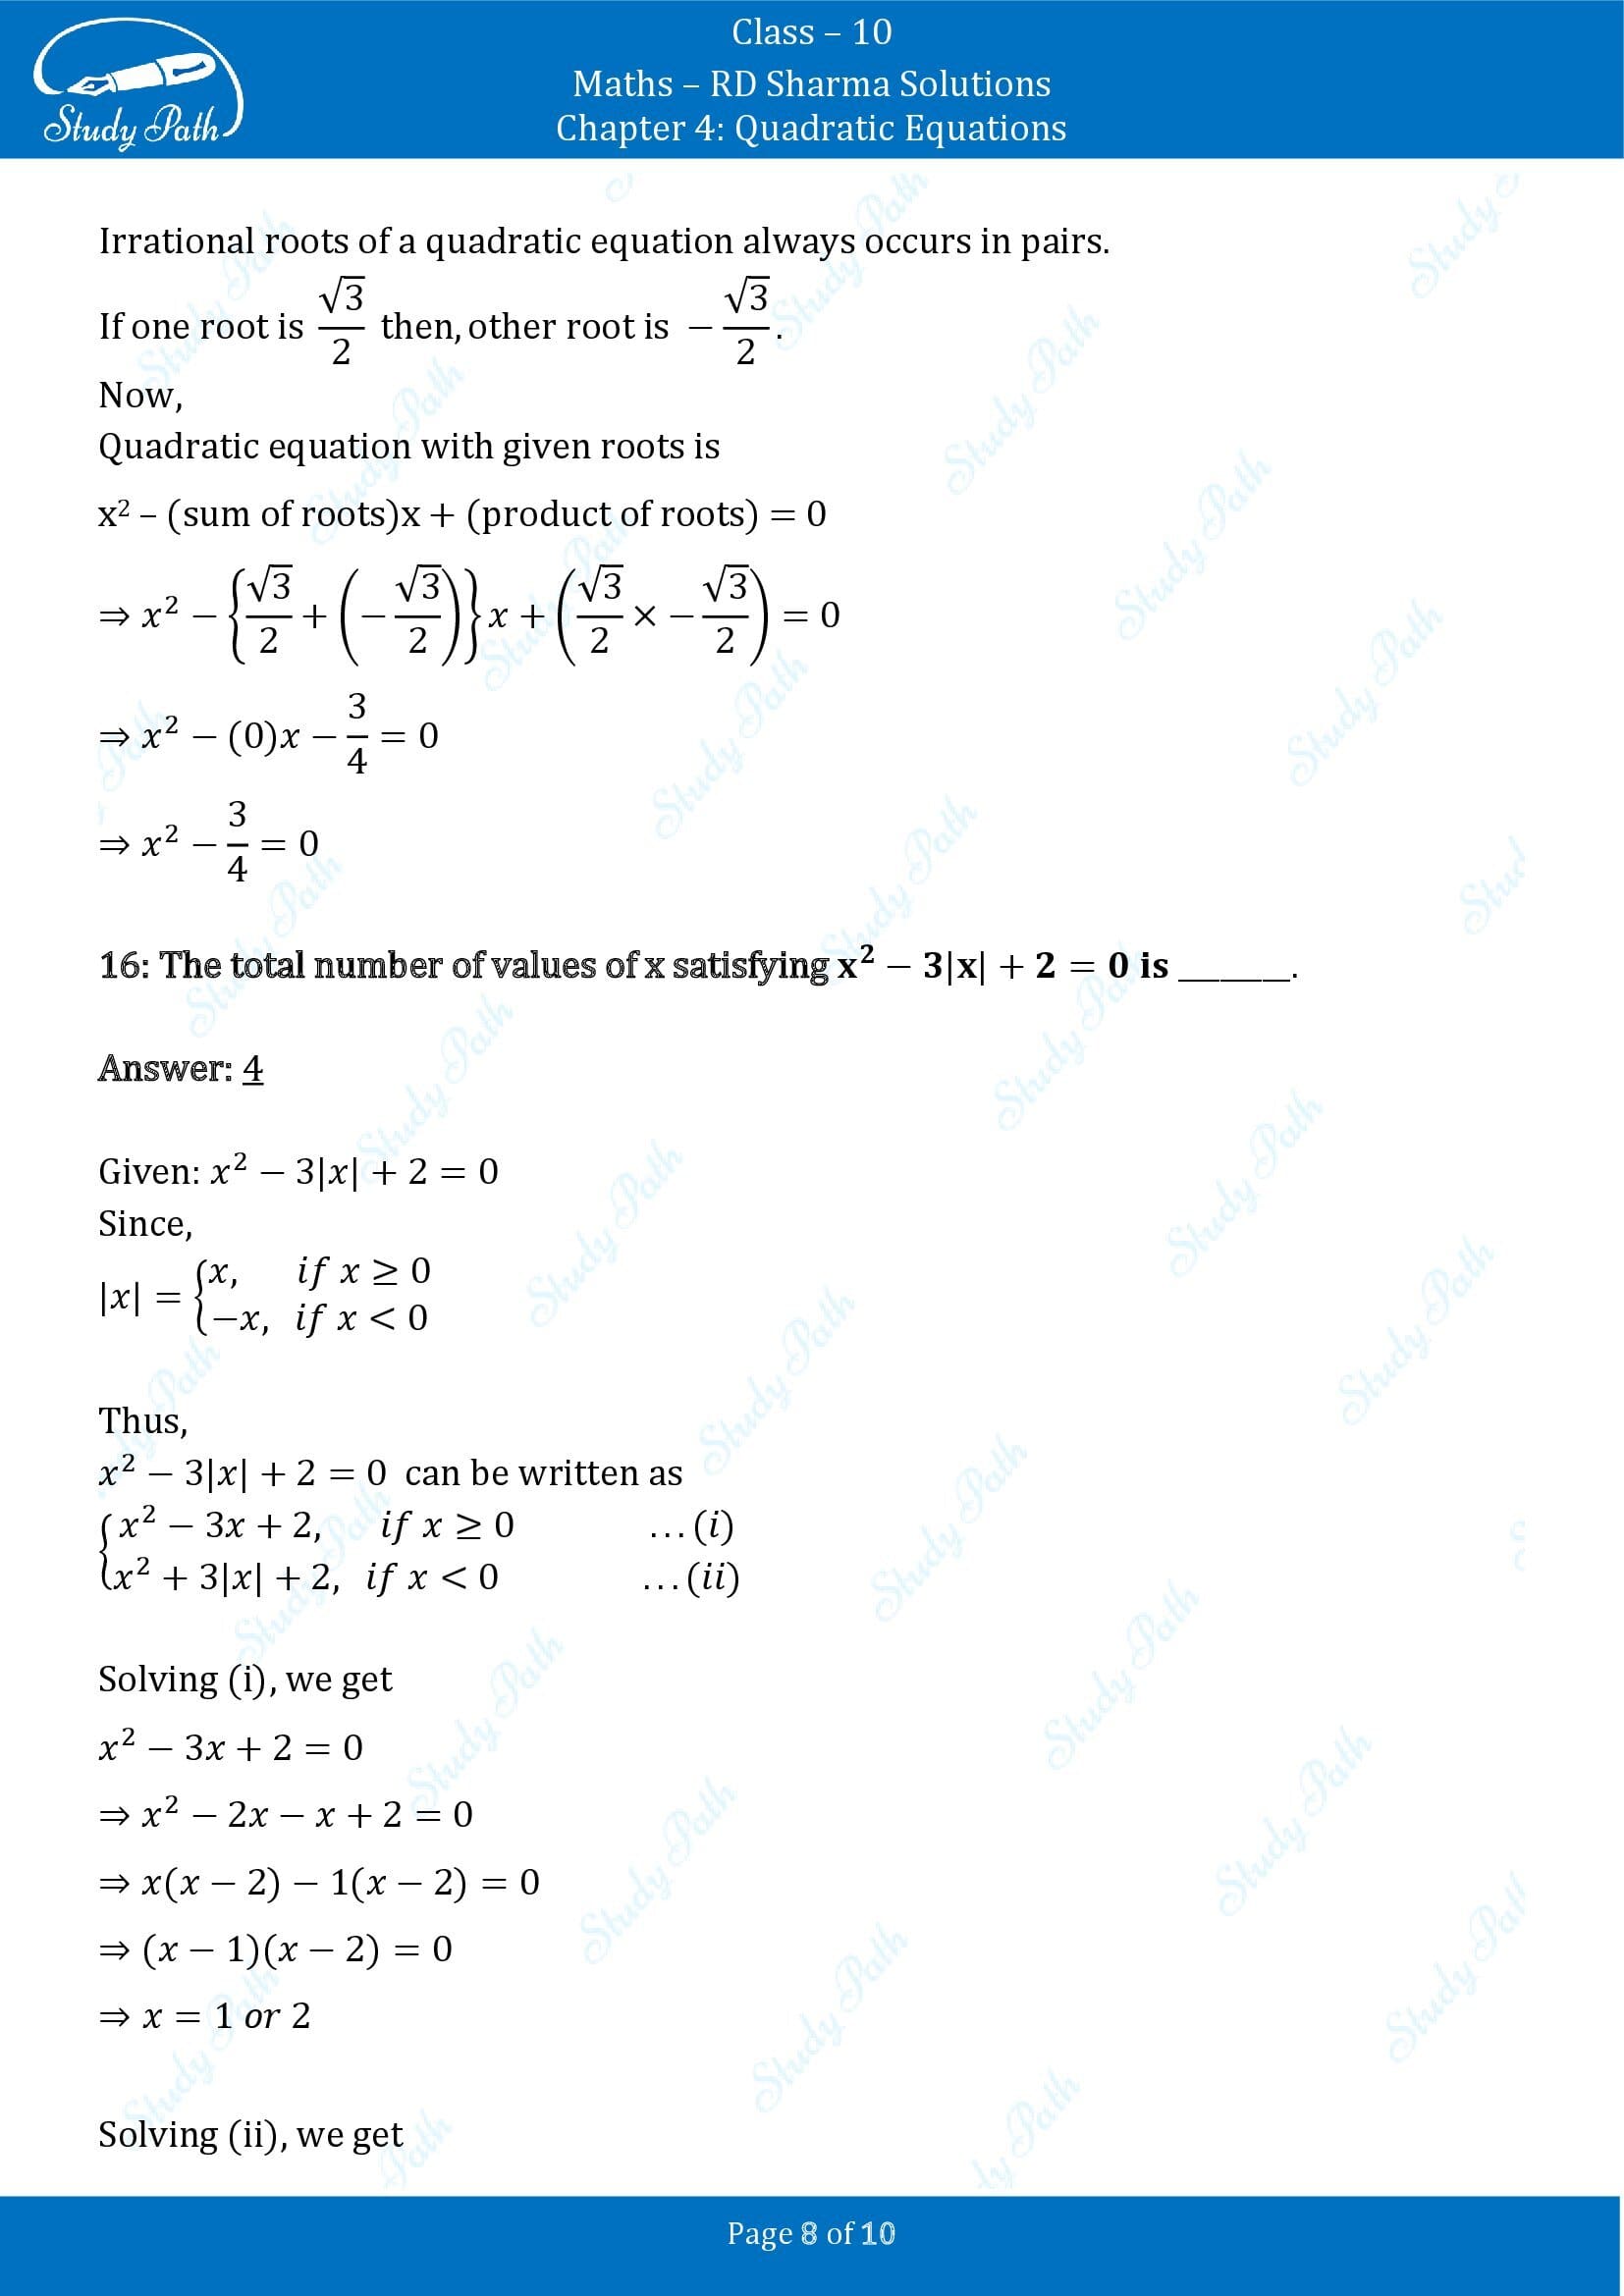 RD Sharma Solutions Class 10 Chapter 4 Quadratic Equations Fill in the Blank Type Questions FBQs 00008